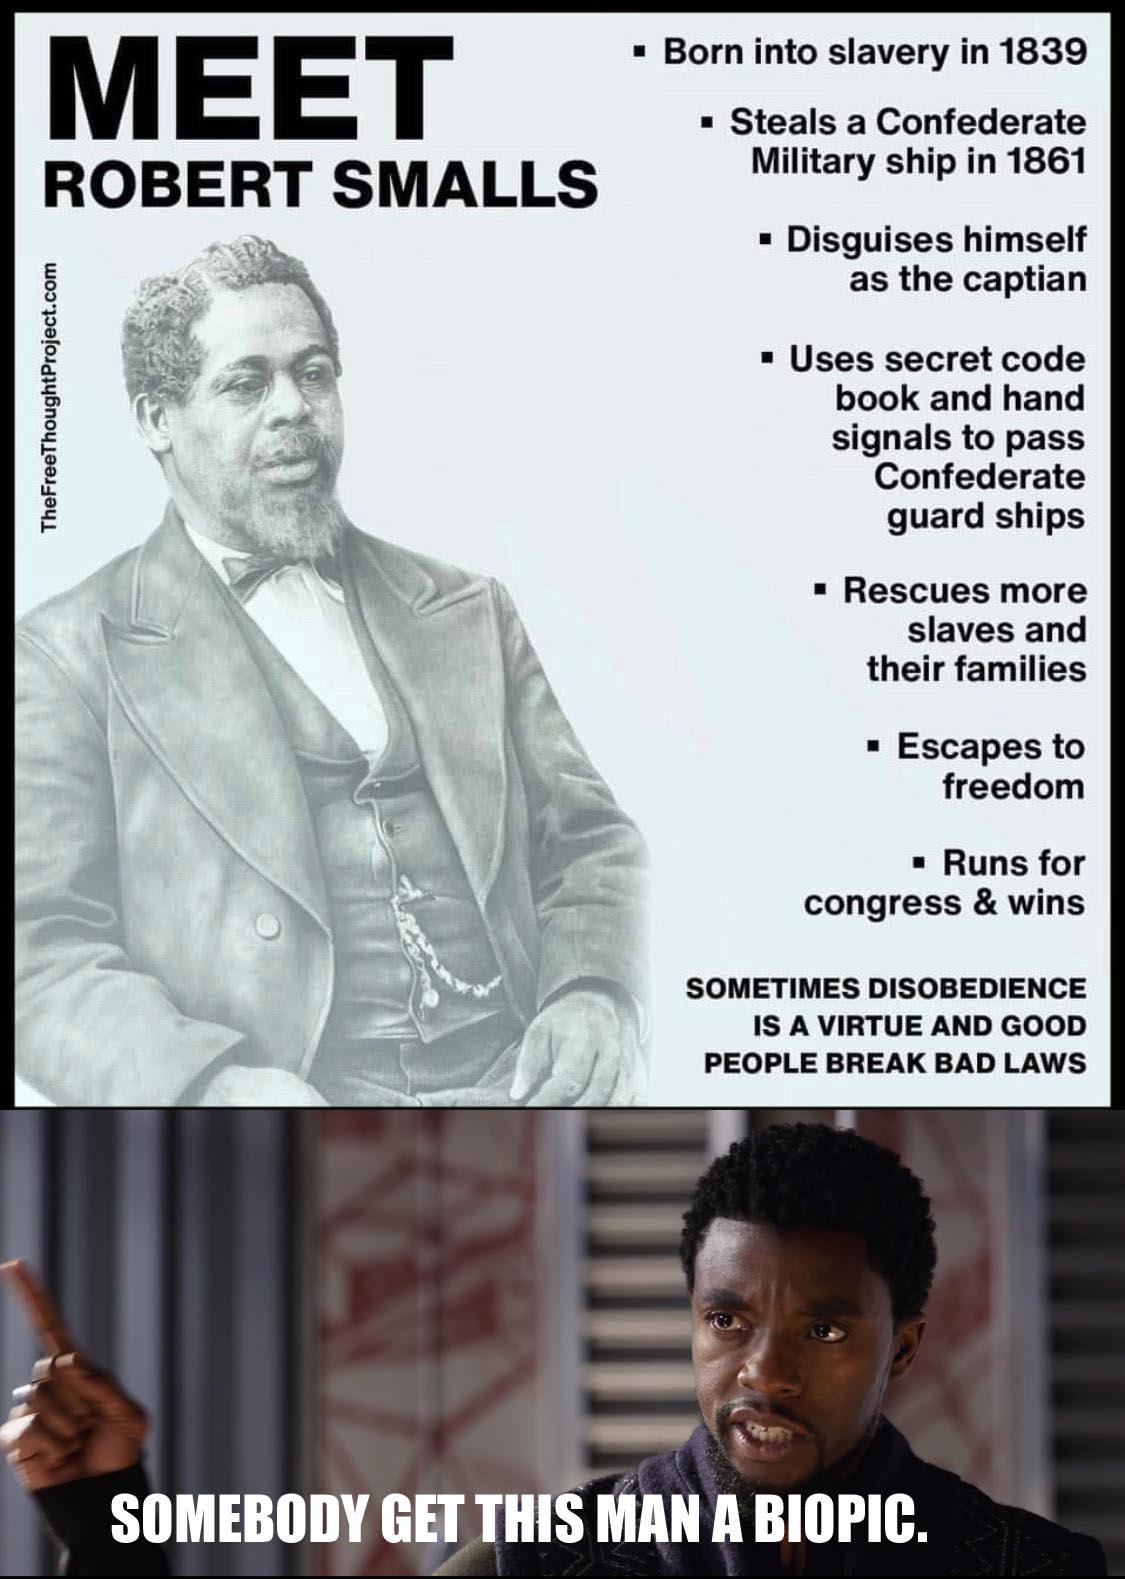 History, Confederate, Smalls, Civil Rights, PbbB2NKu5, James History Memes History, Confederate, Smalls, Civil Rights, PbbB2NKu5, James text: MEET ROBERT SMALLS • Born into slavery in 1839 • Steals a Confederate Military ship in 1861 • Disguises himself as the captian • Uses secret code book and hand signals to pass Confederate guard ships • Rescues more slaves and their families • Escapes to freedom • Runs for congress & wins SOMETIMES DISOBEDIENCE IS A VIRTUE AND GOOD PEOPLE BREAK BAD LAWS SOMEBODY GET THIS MAN A BIOPIC. 